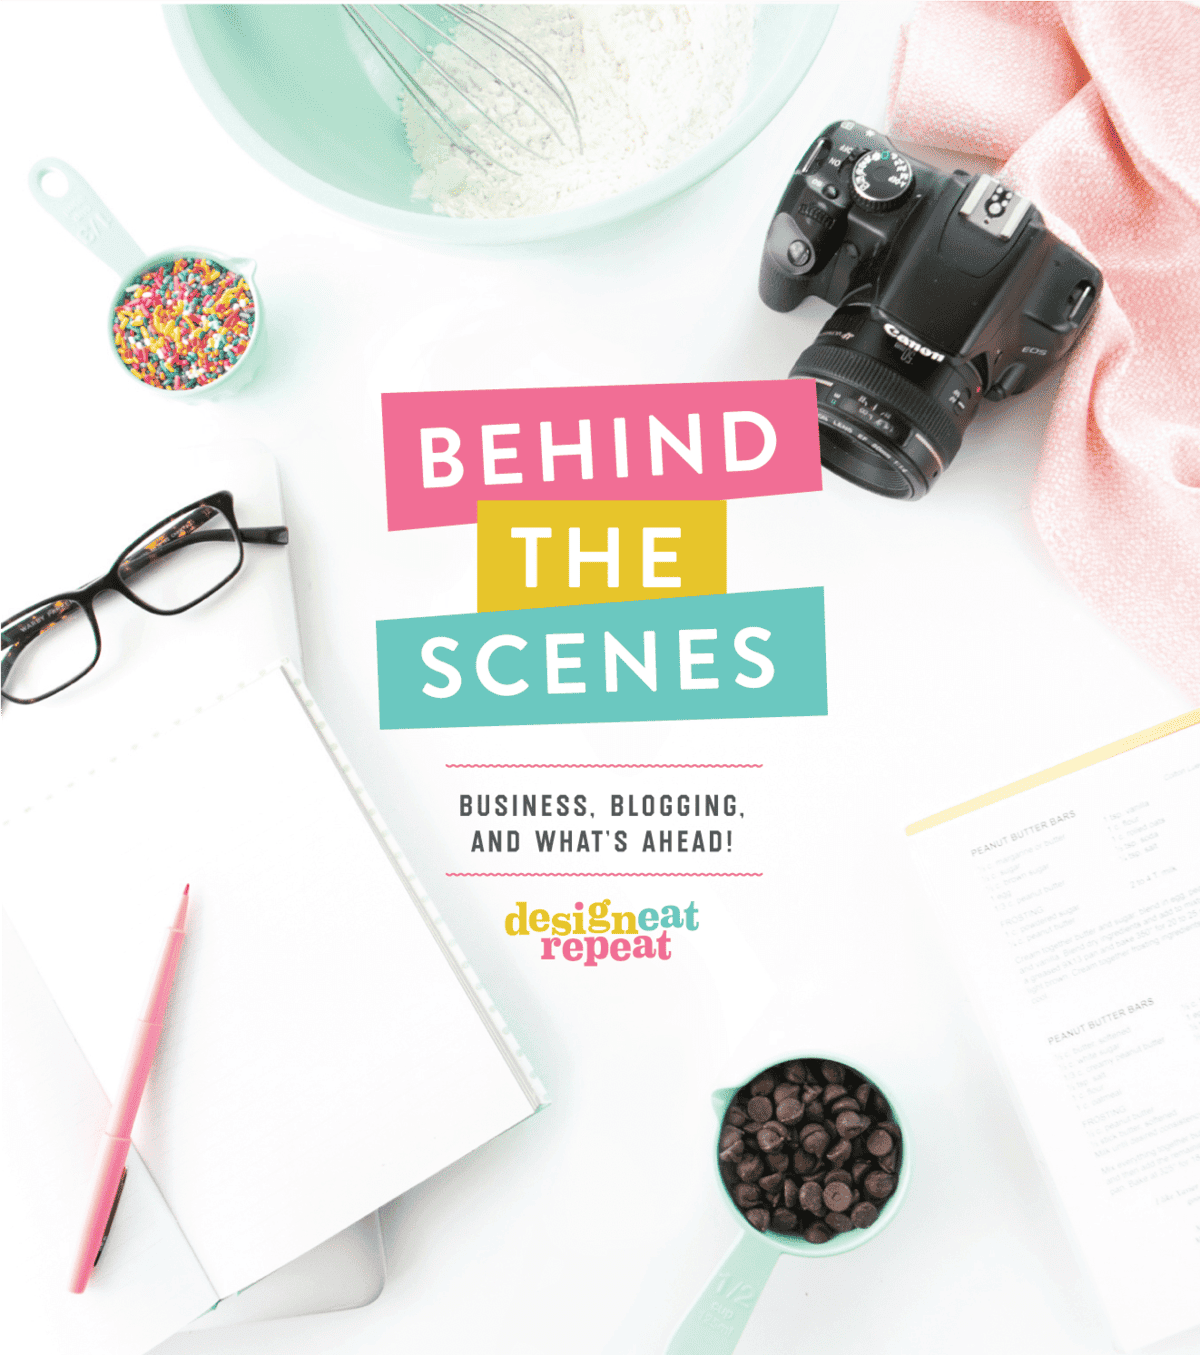 Behind The Scenes: Business, Blogging, and What's Ahead for Design Eat Repeat!